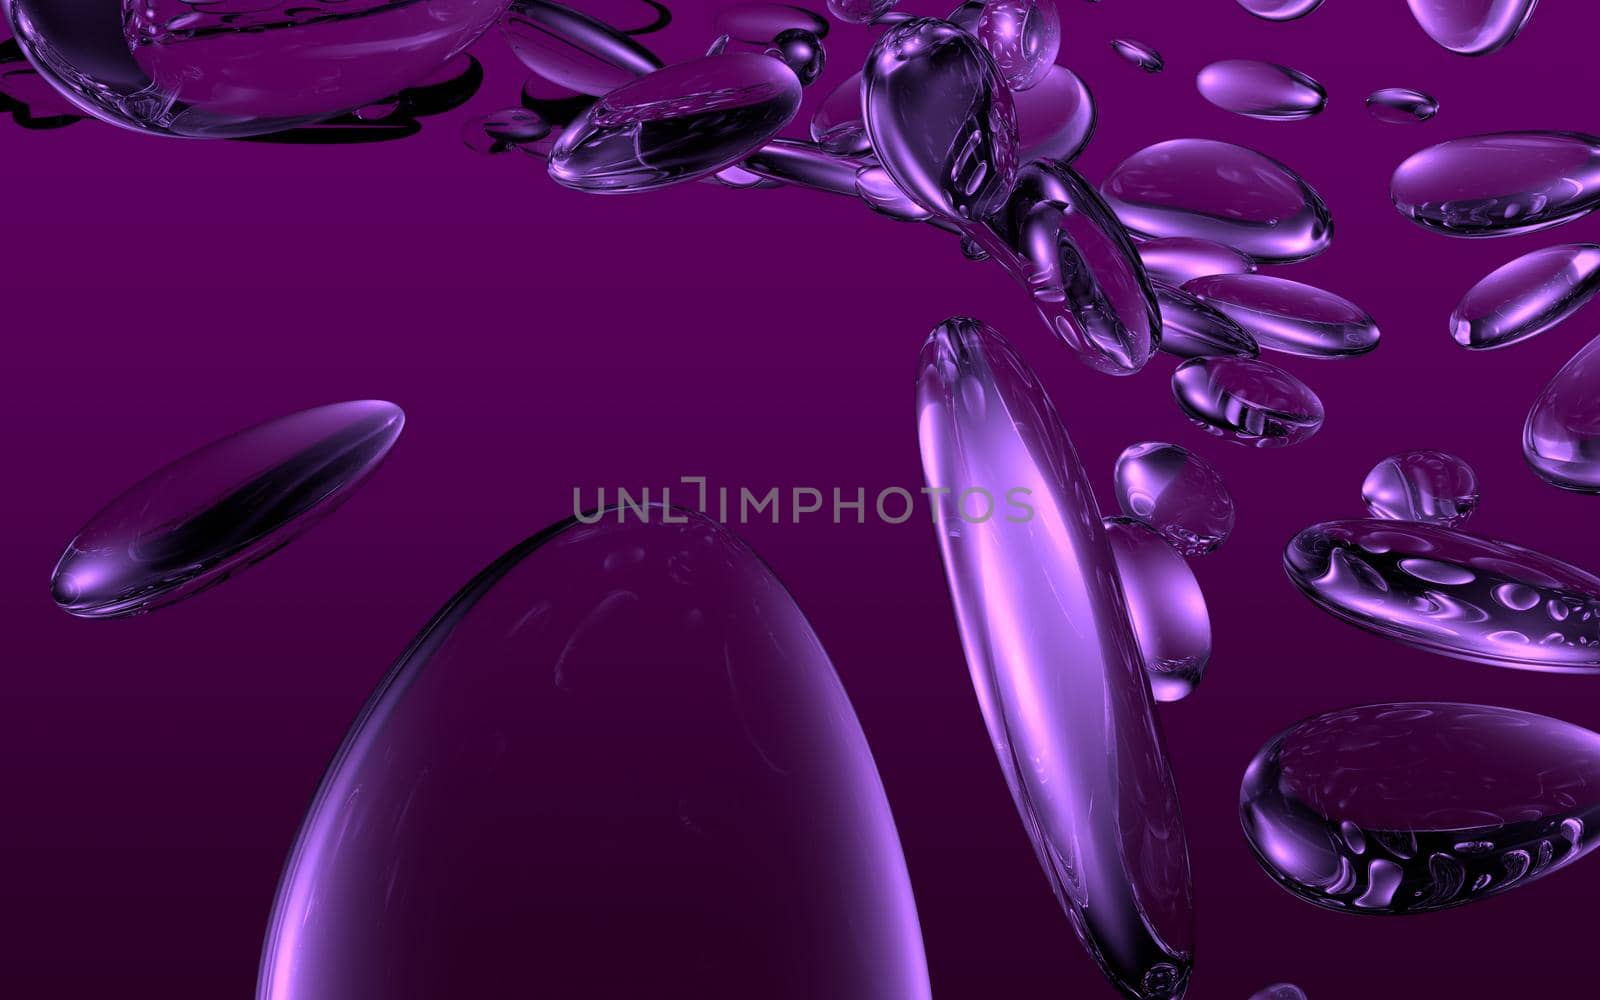 Swirl of water droplets on a purple background. Abstract 3D illustration render